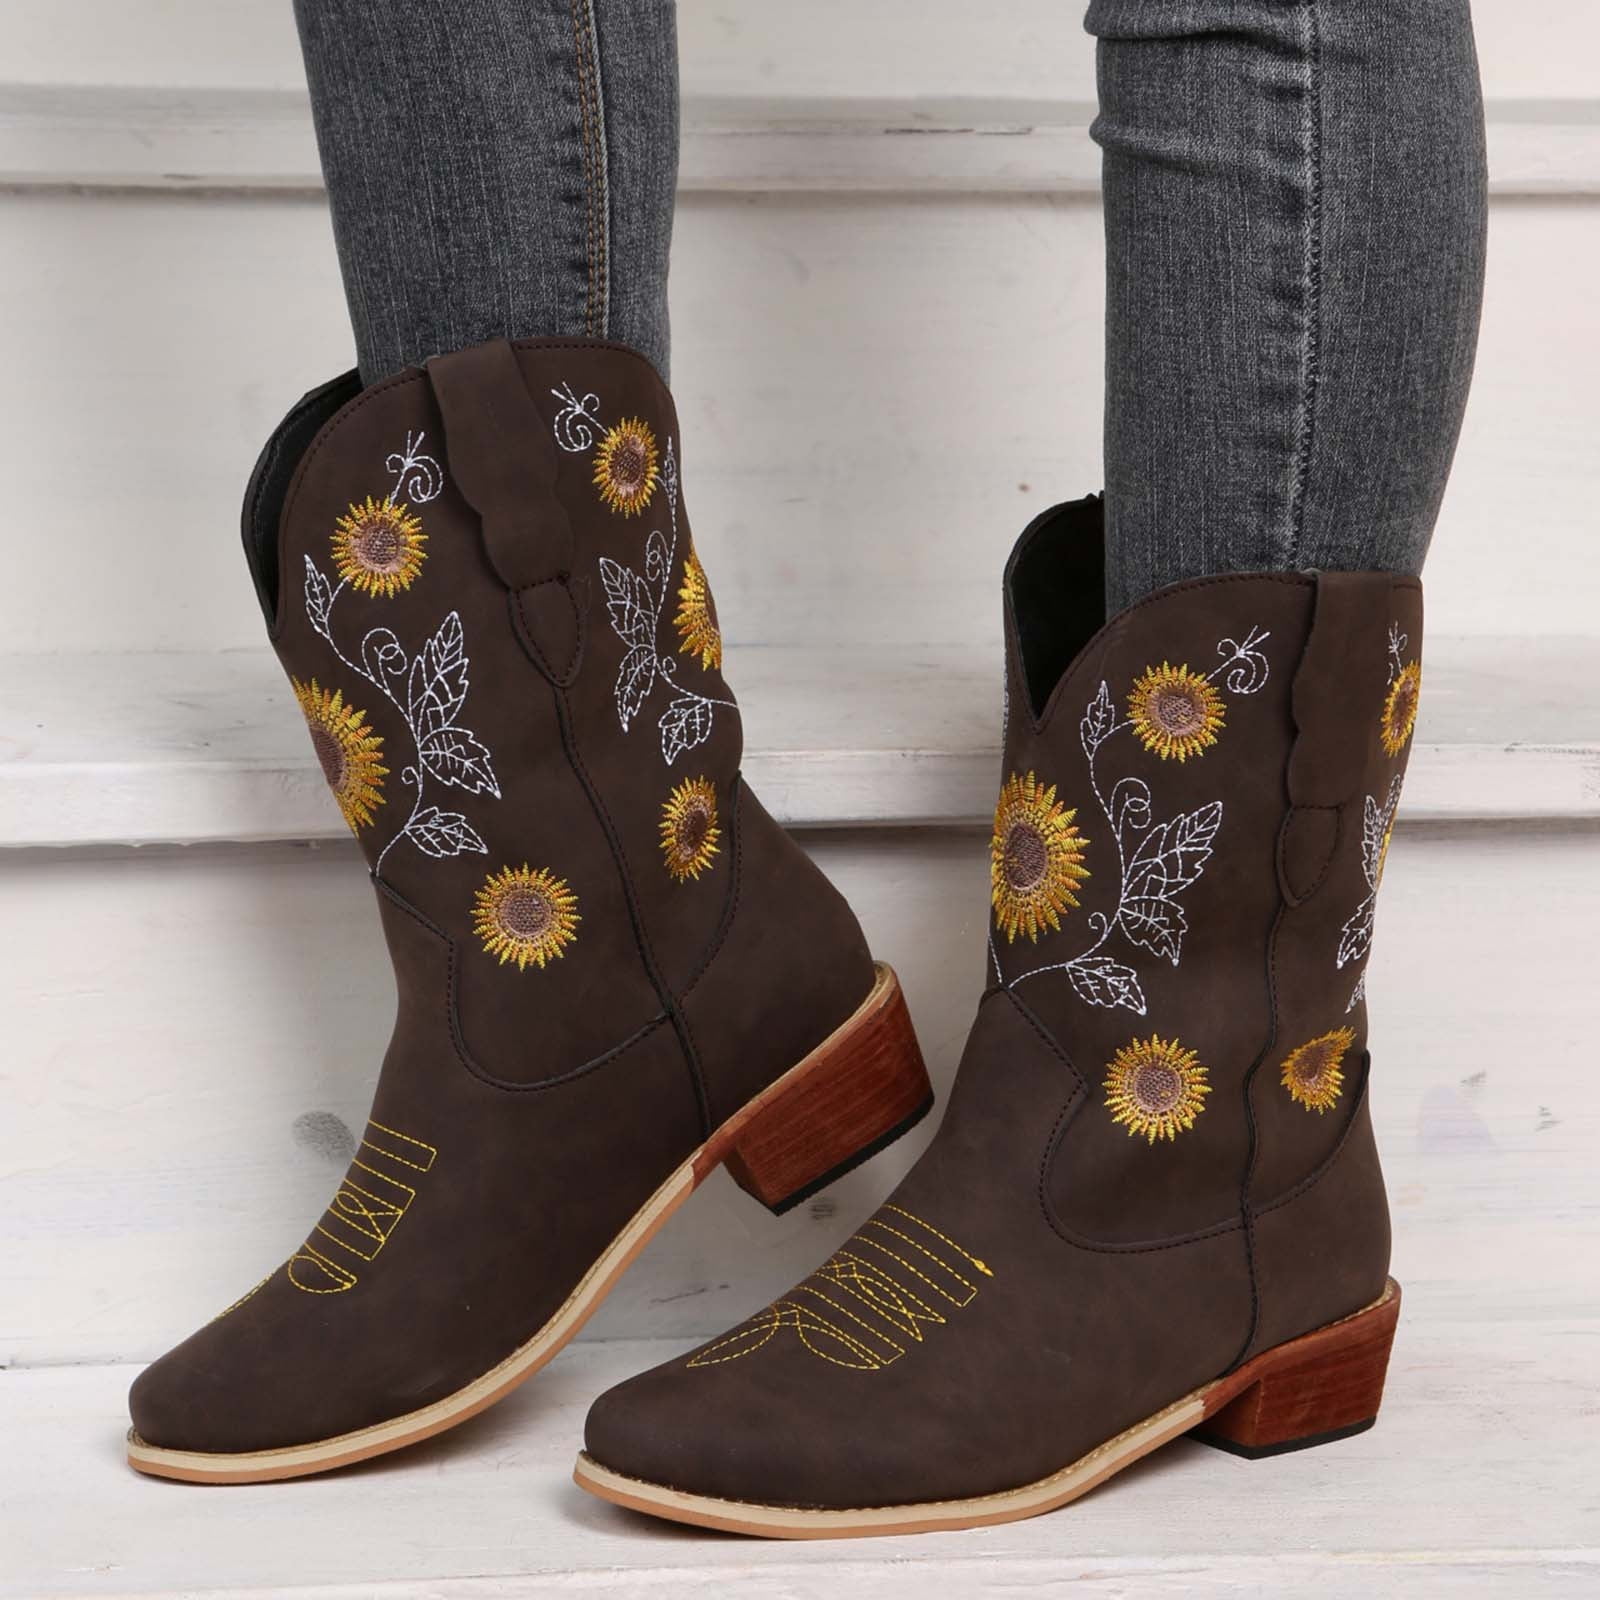 Womens Leather Boots Turquoise Flower Embroidered Western Wedding Snip Toe Botas 